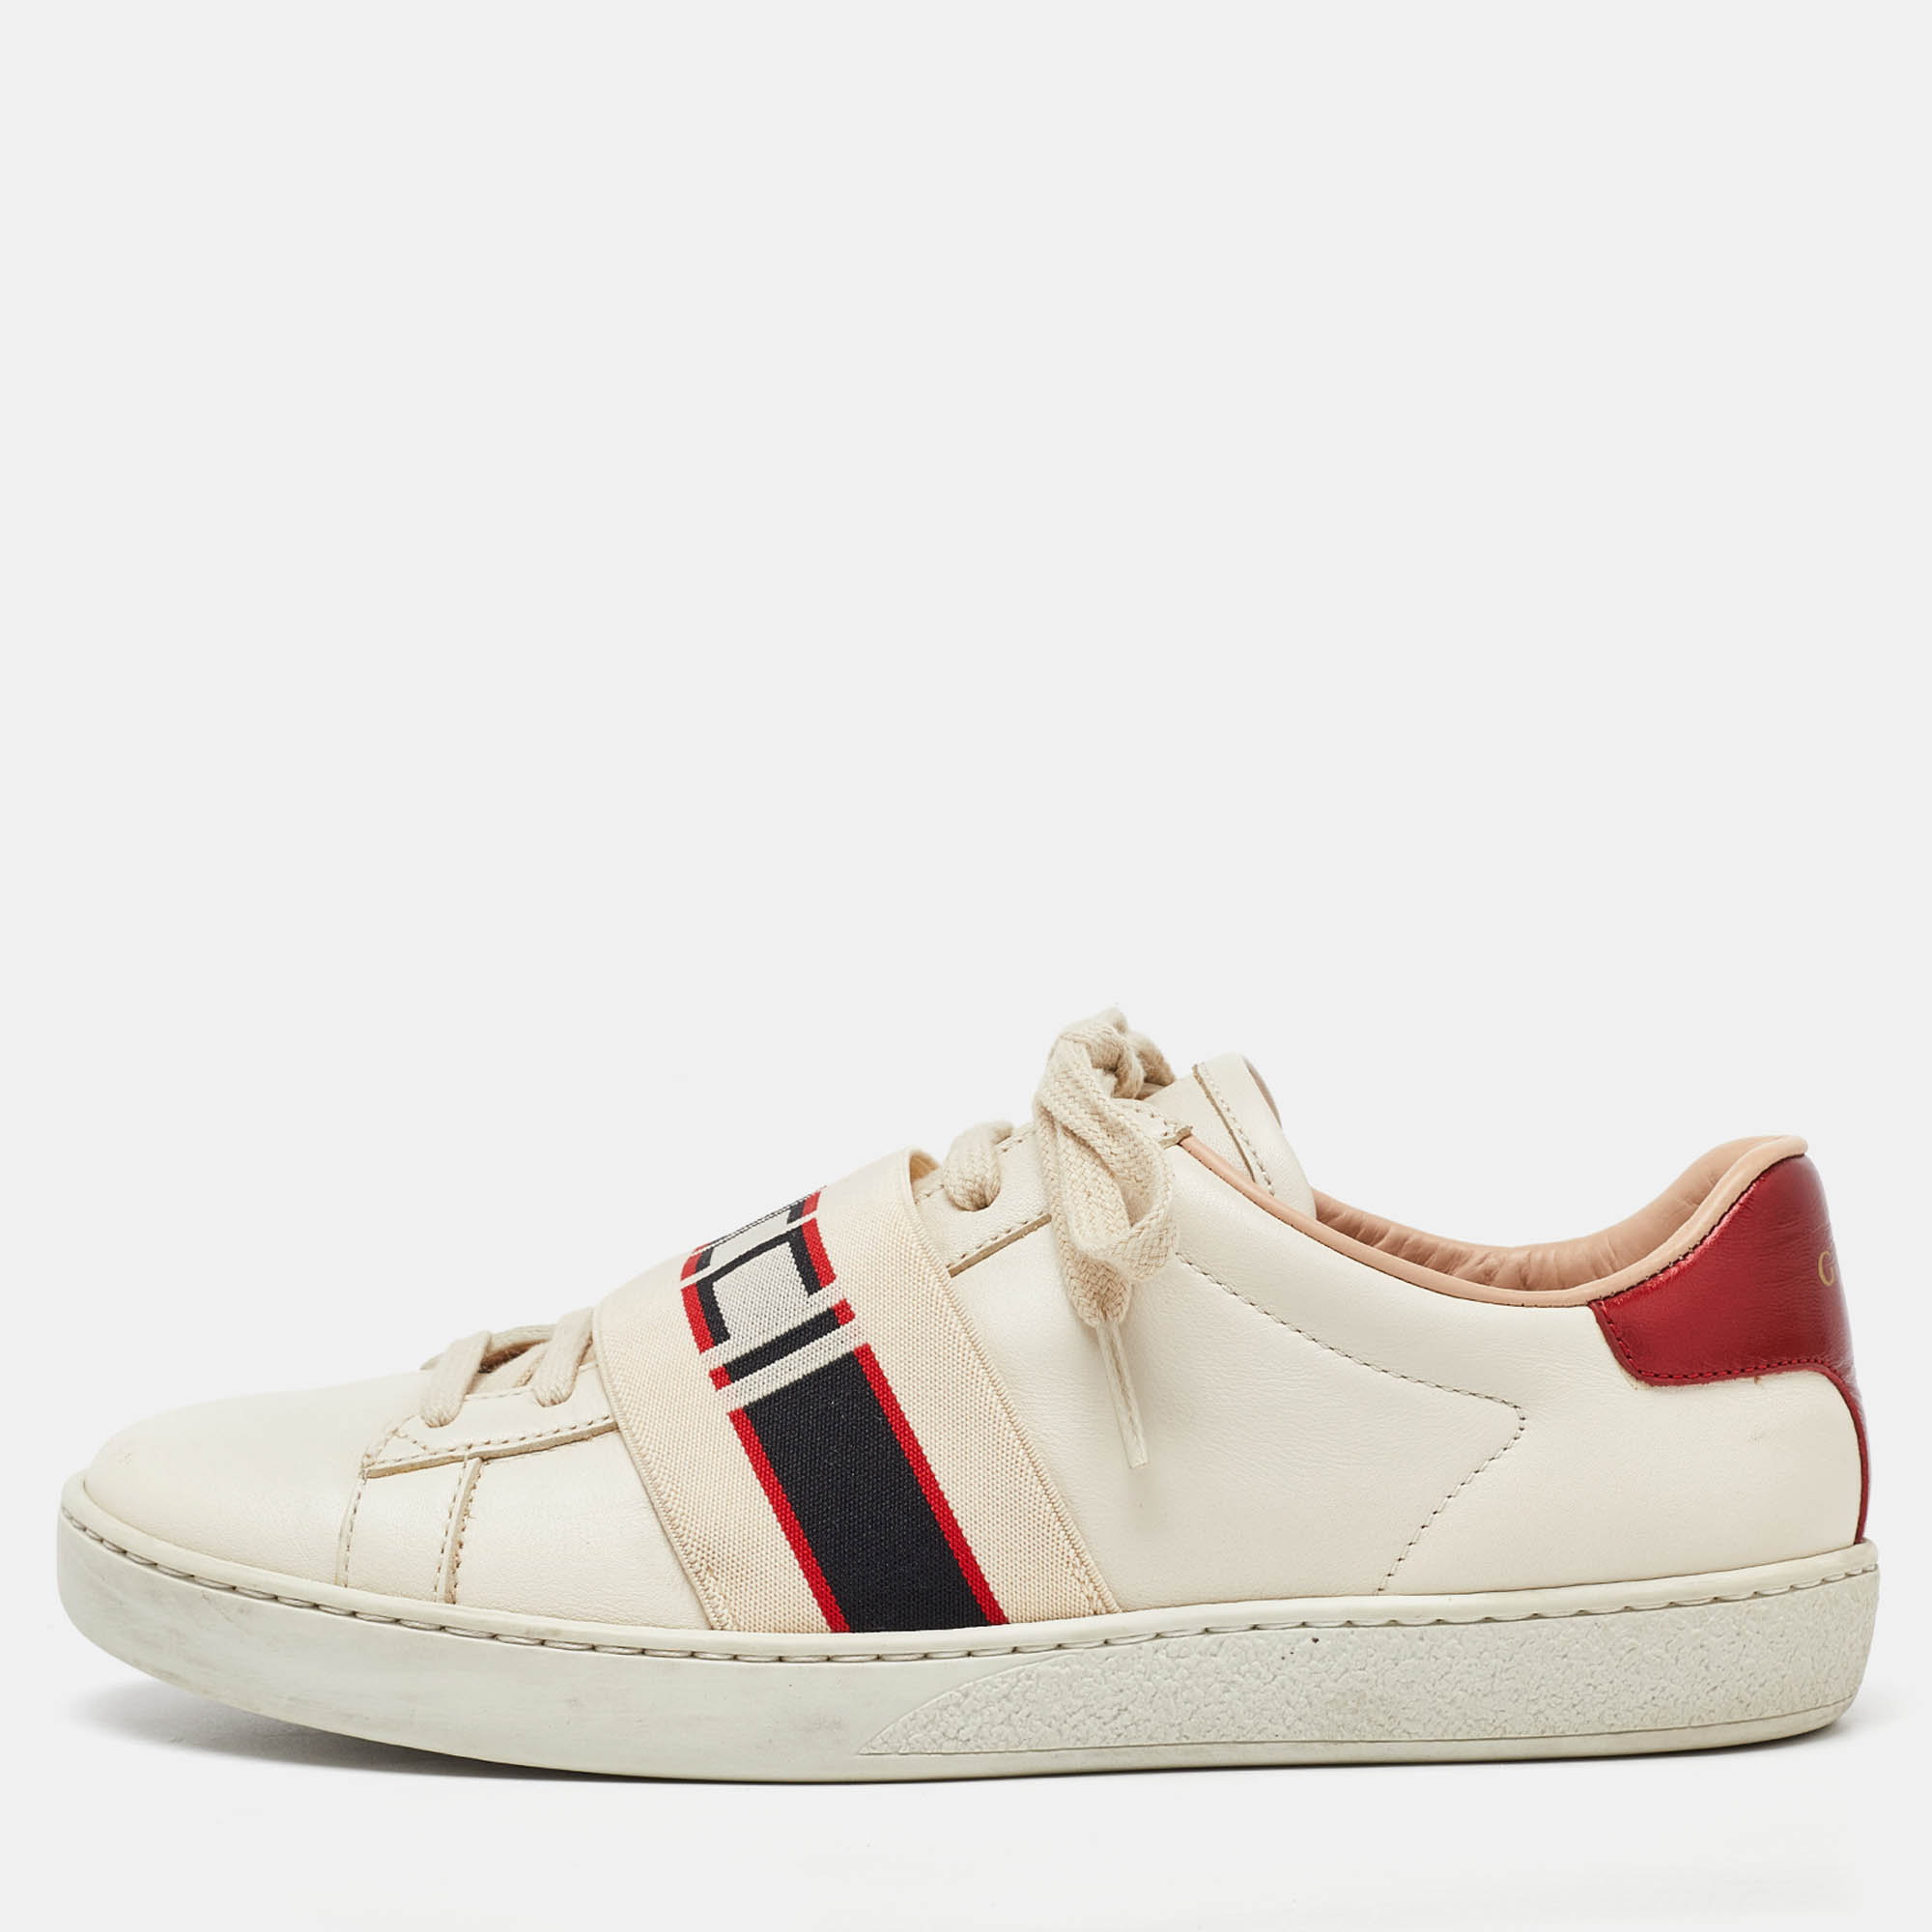 Gucci white/red leather ace gucci band low top sneakers size 37